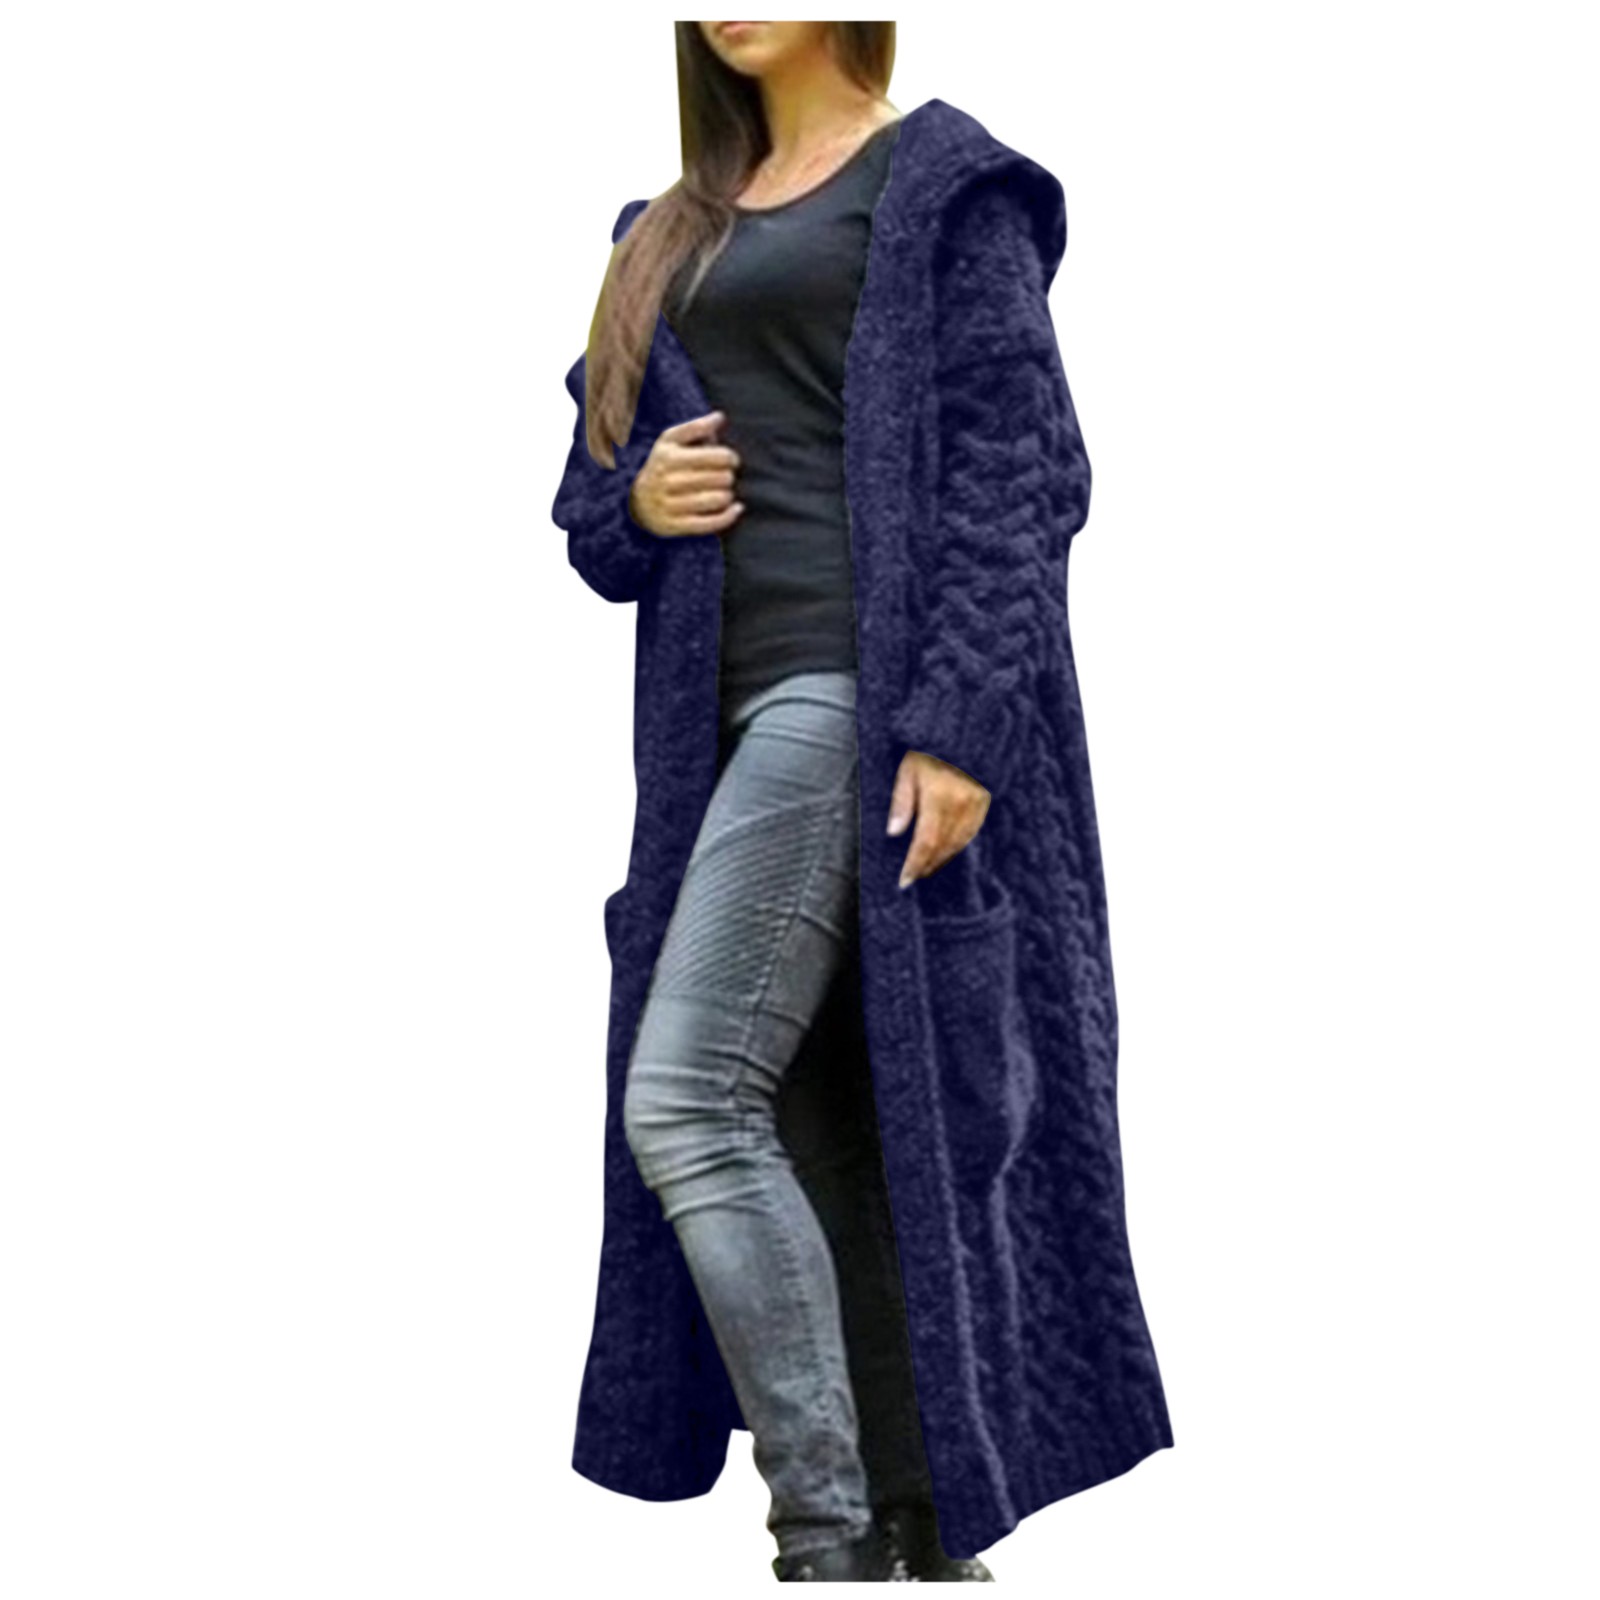 UPPADA Casual Jackets for Women Women's Winter Coat Warm Puffer jacket Plus Size Sherpa Lined Coats Batwing Cable Knitted Slouchy Wrap Cardigan Abrigos de Mujer - image 1 of 6